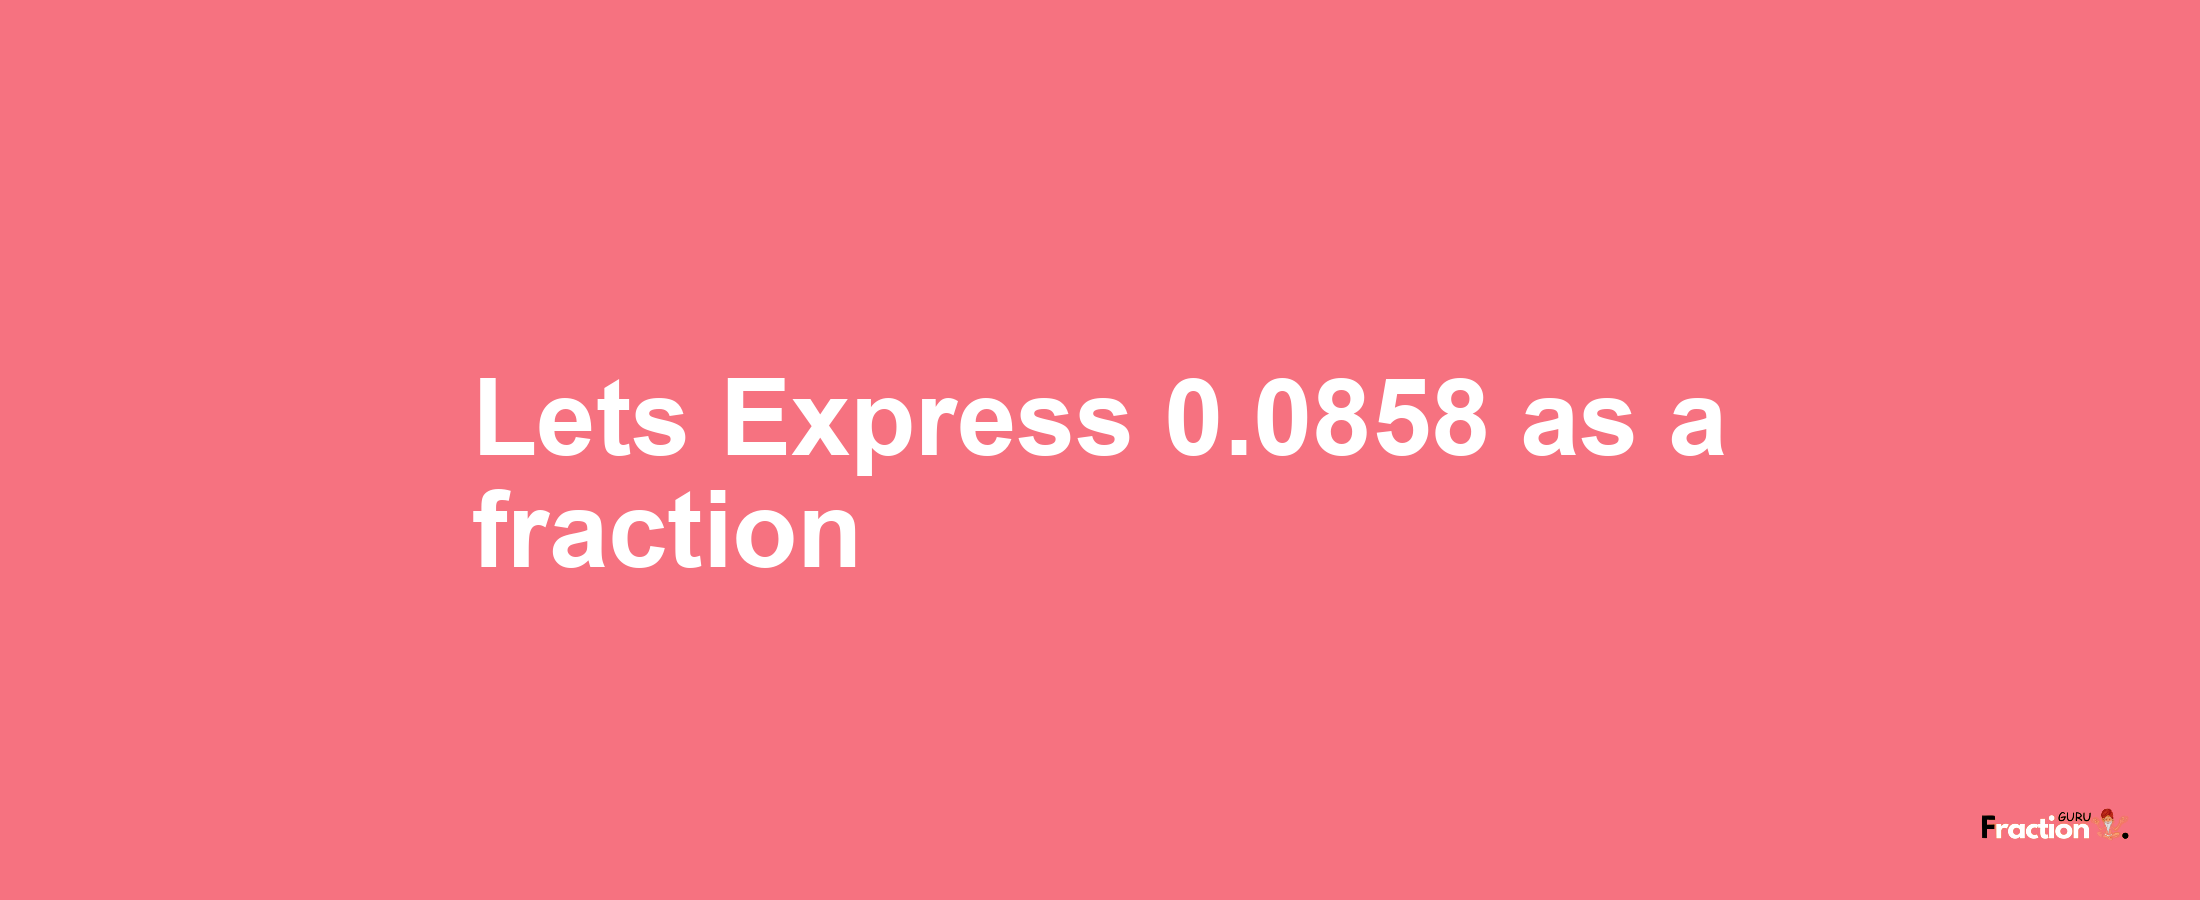 Lets Express 0.0858 as afraction